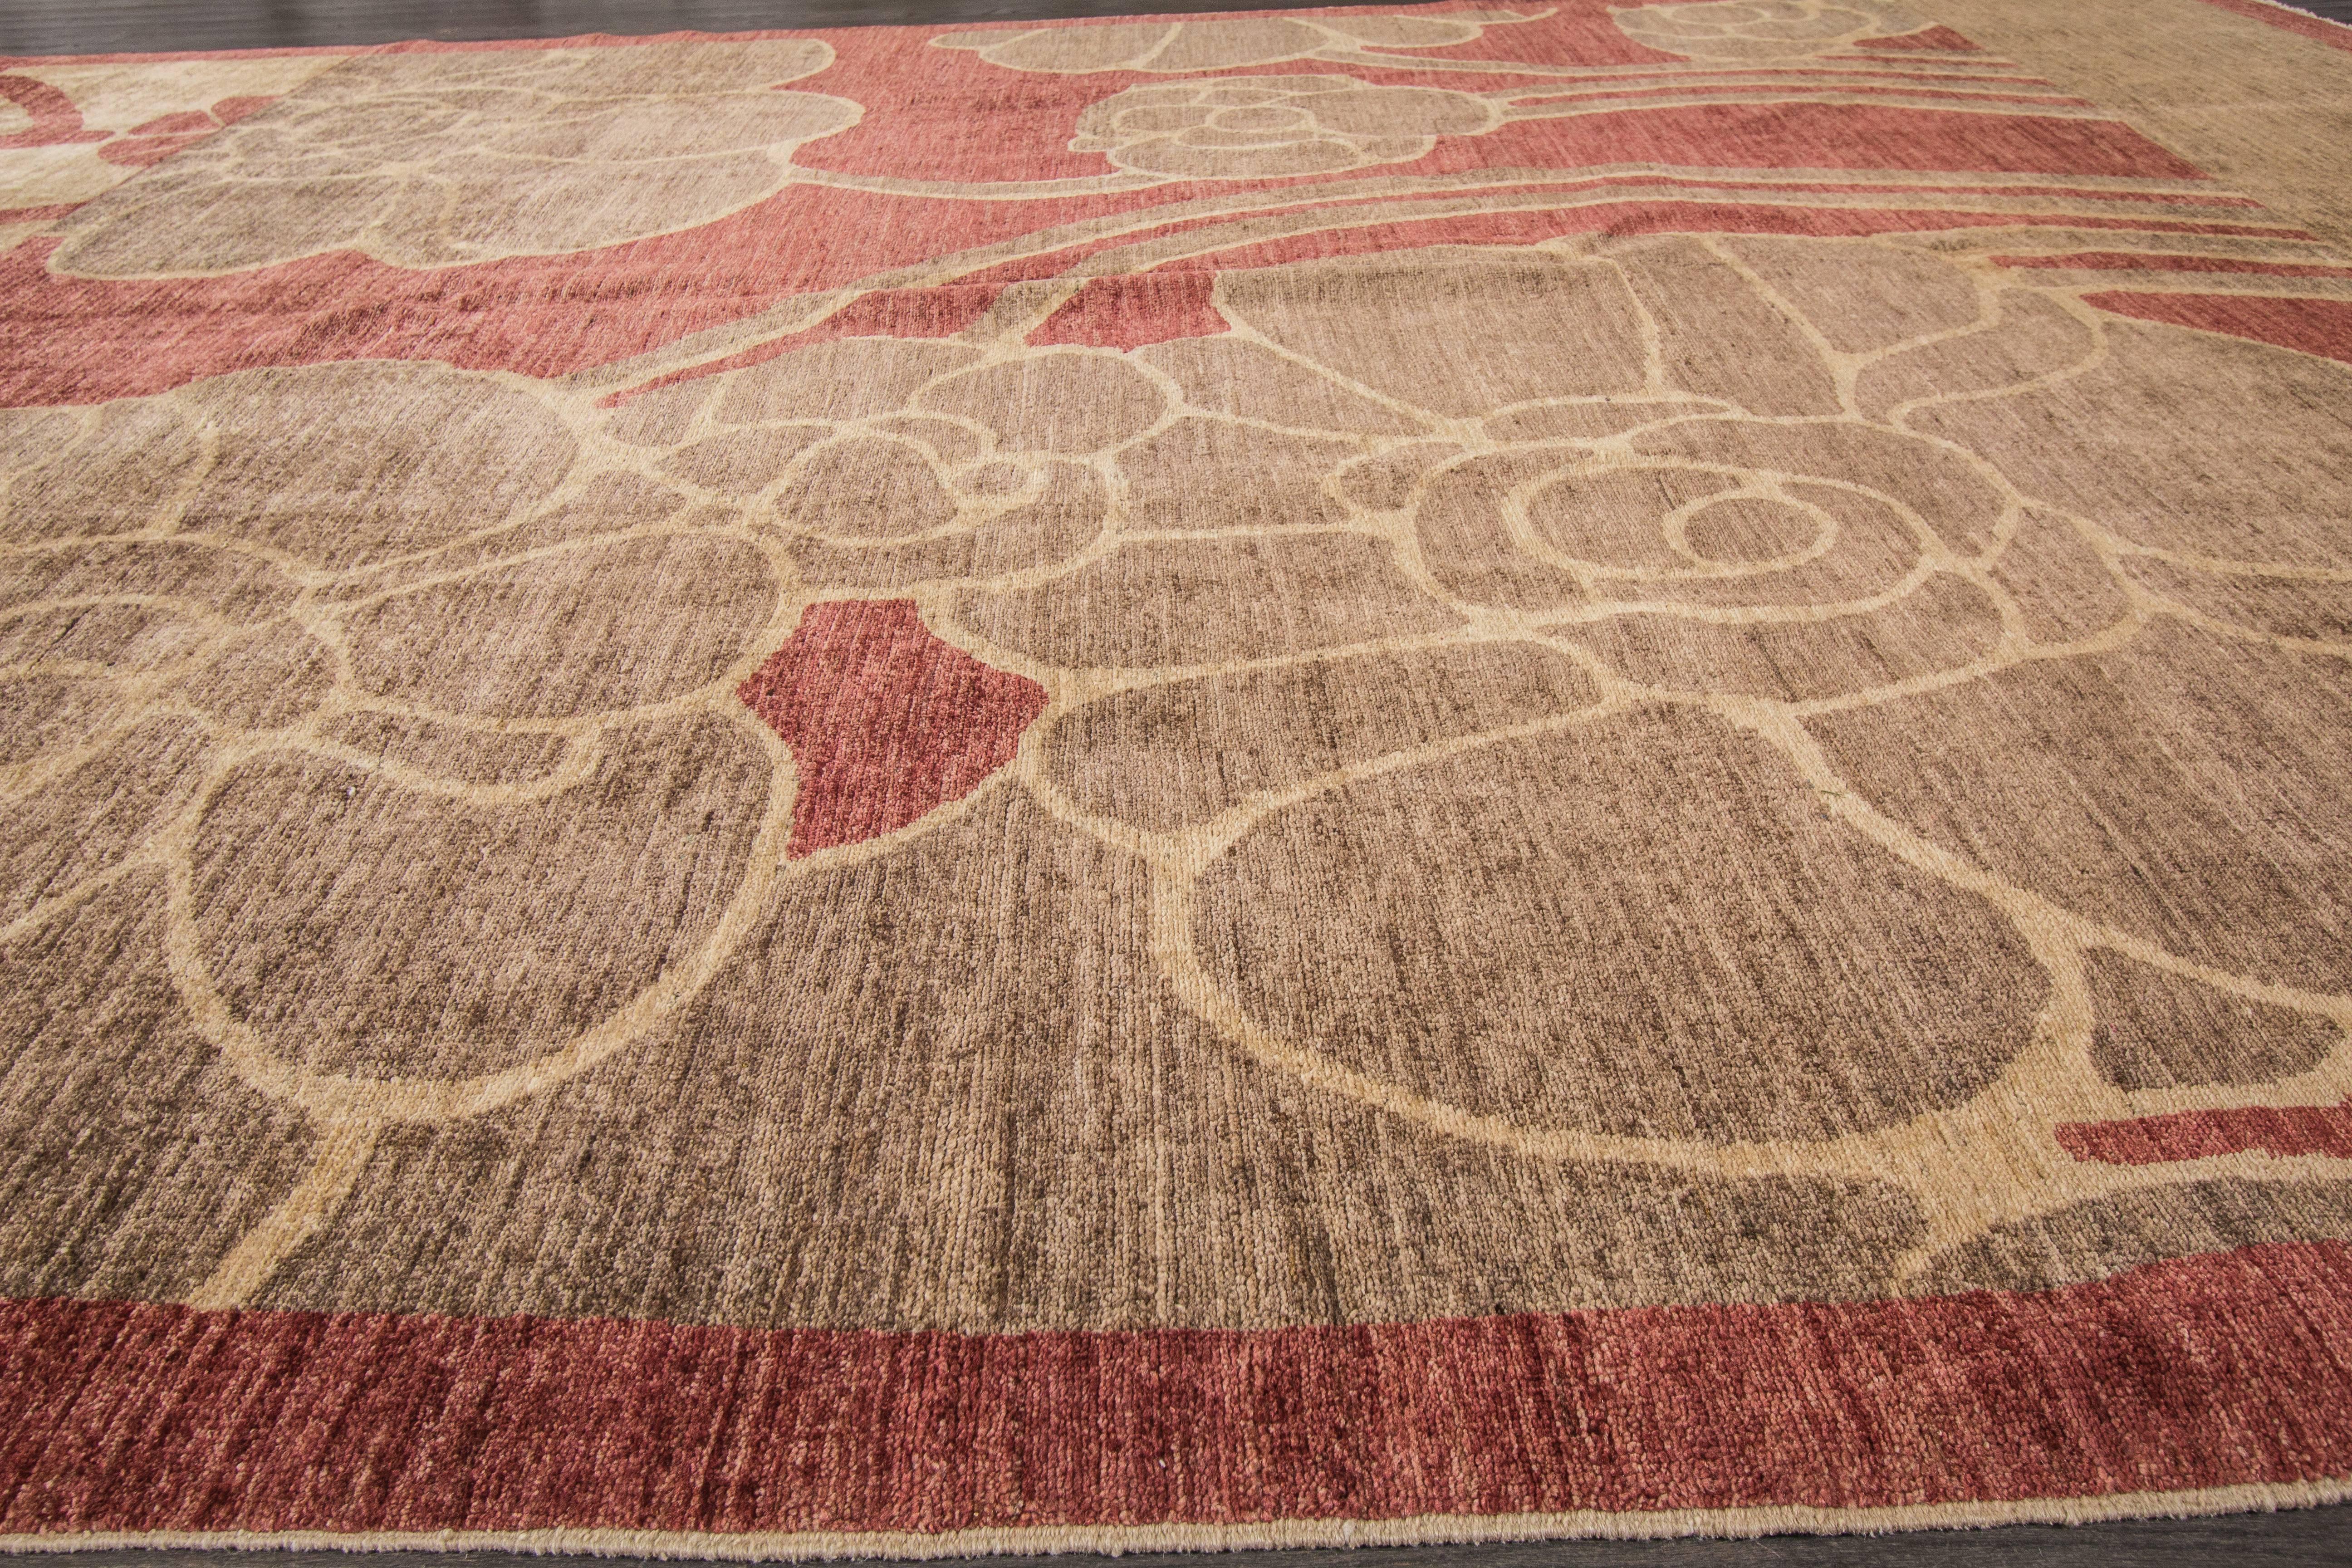 Modern contemporary hand-knotted rug with a floral design on a red field. 

This rug has magnificent detailing and would be perfect for any room. Measures: 8'3